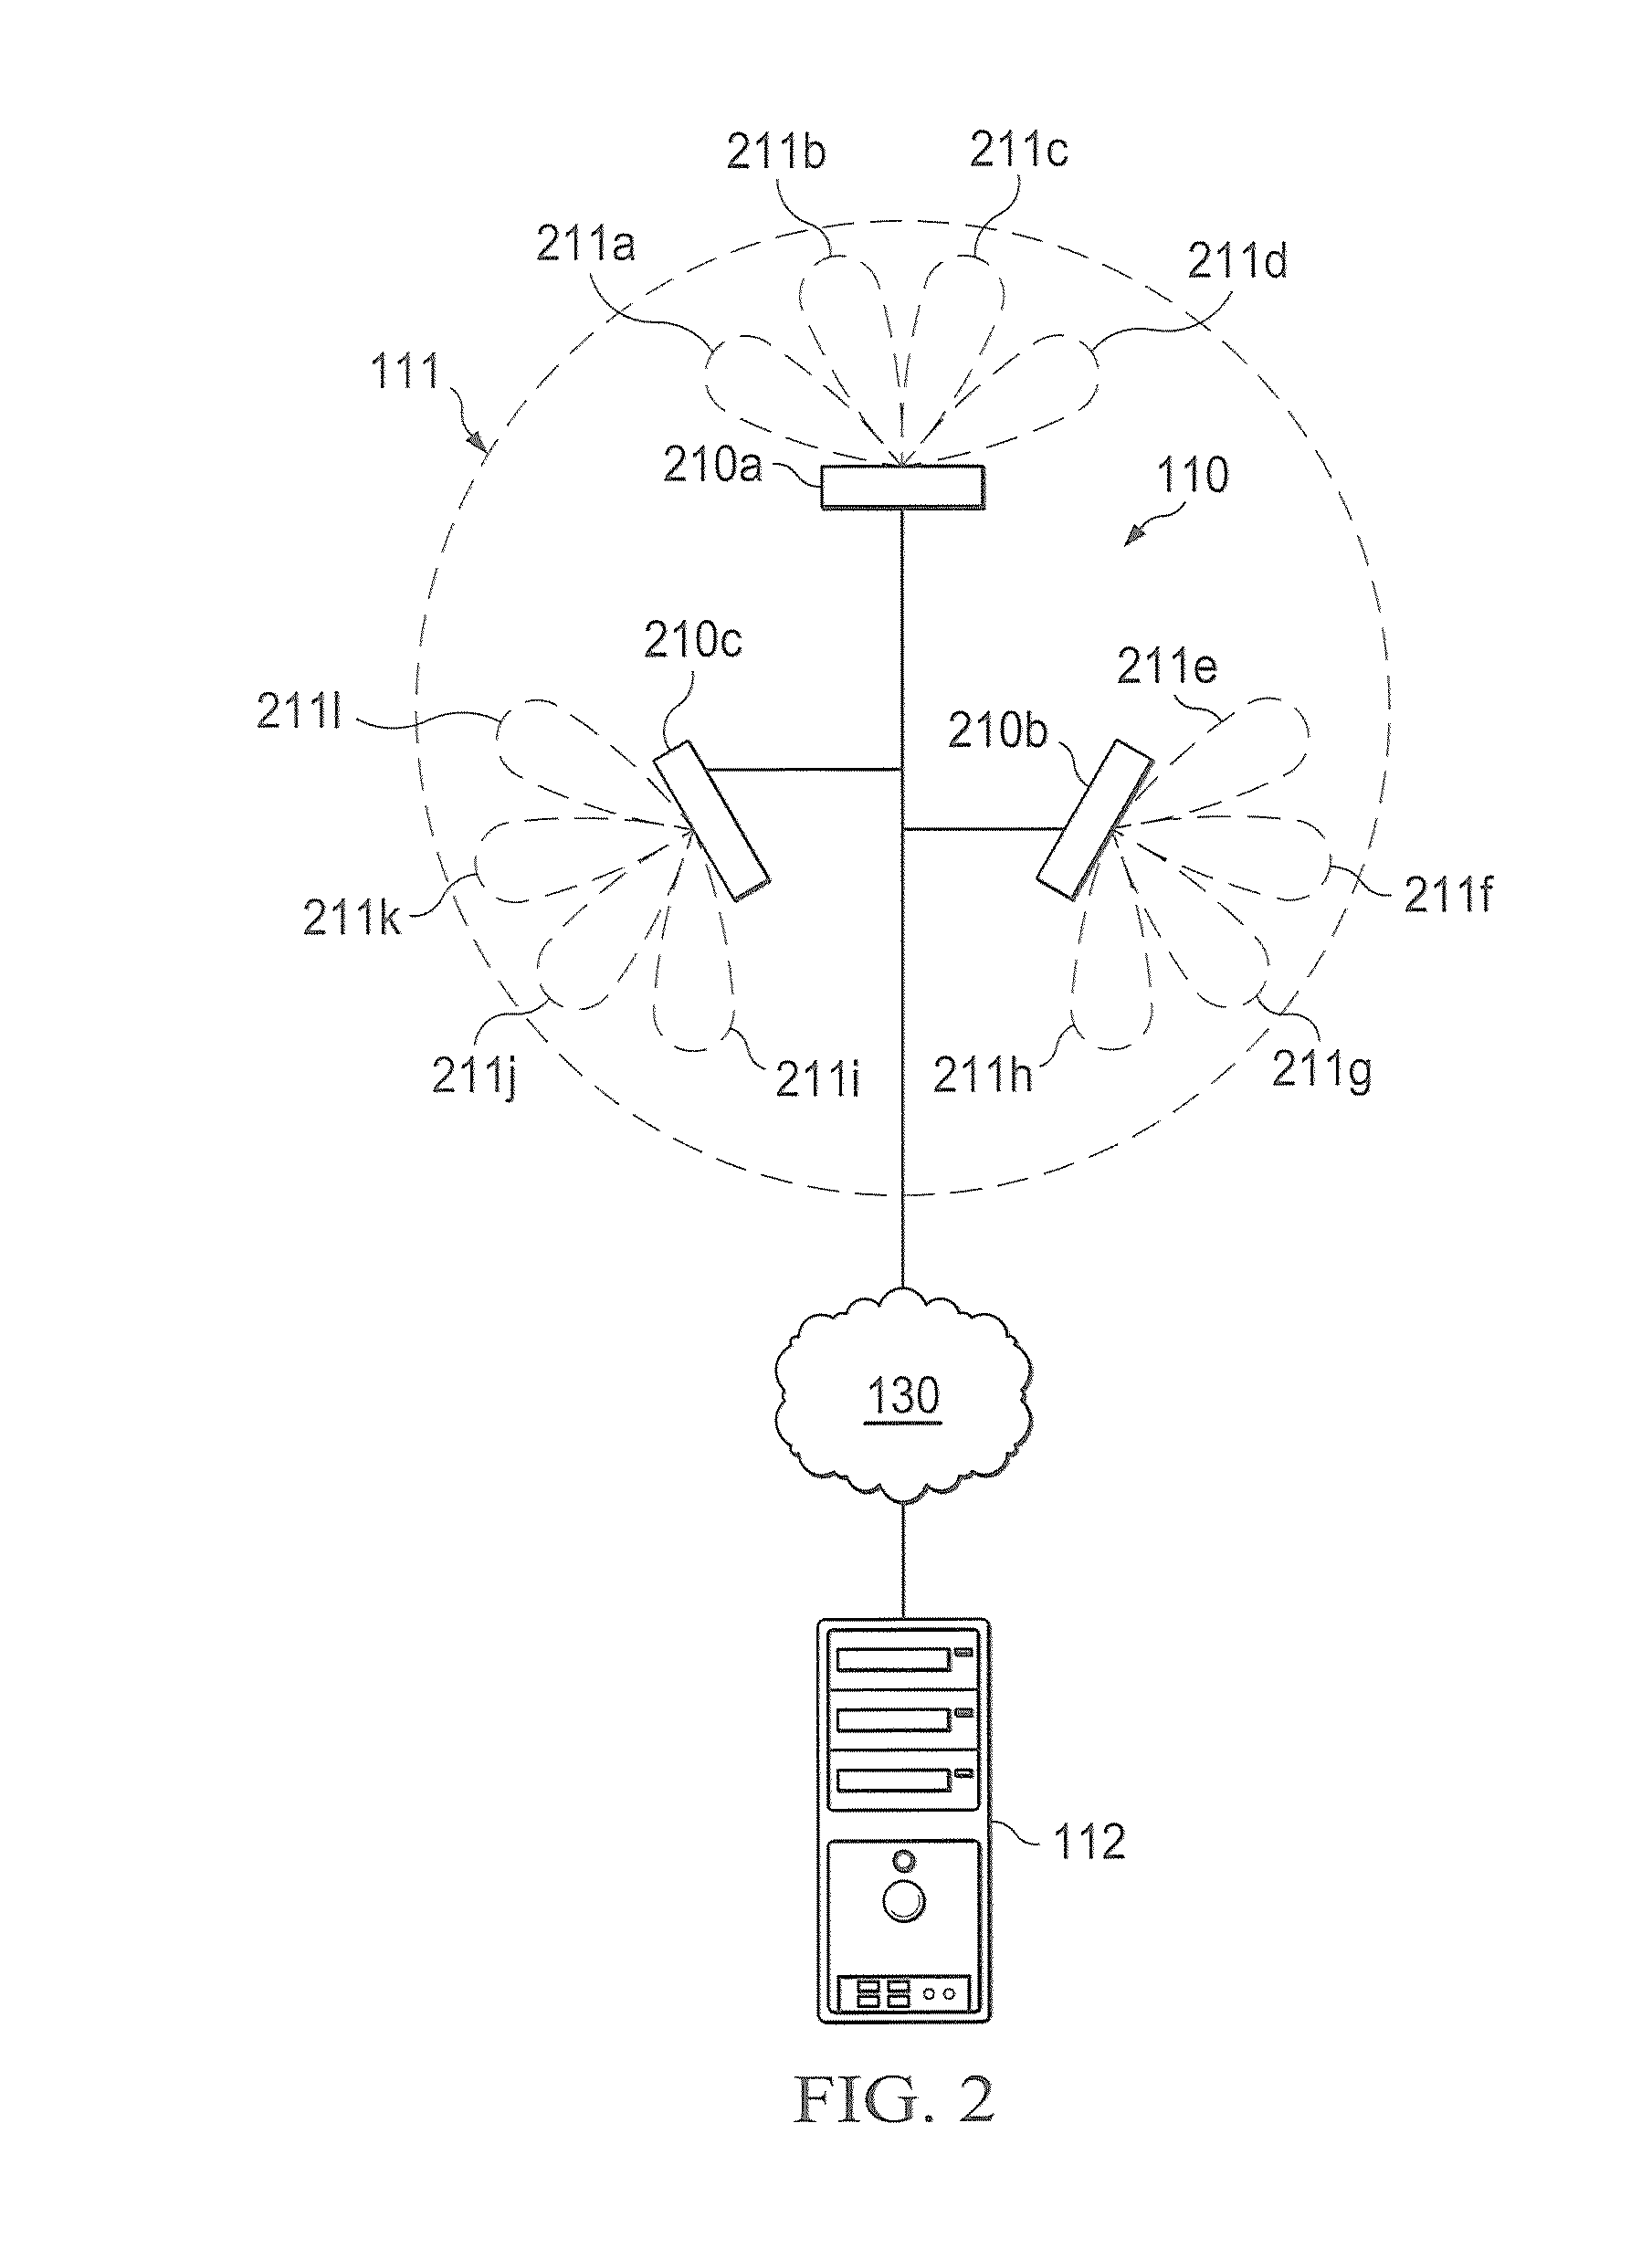 Systems and methods for mitigating interference between access points